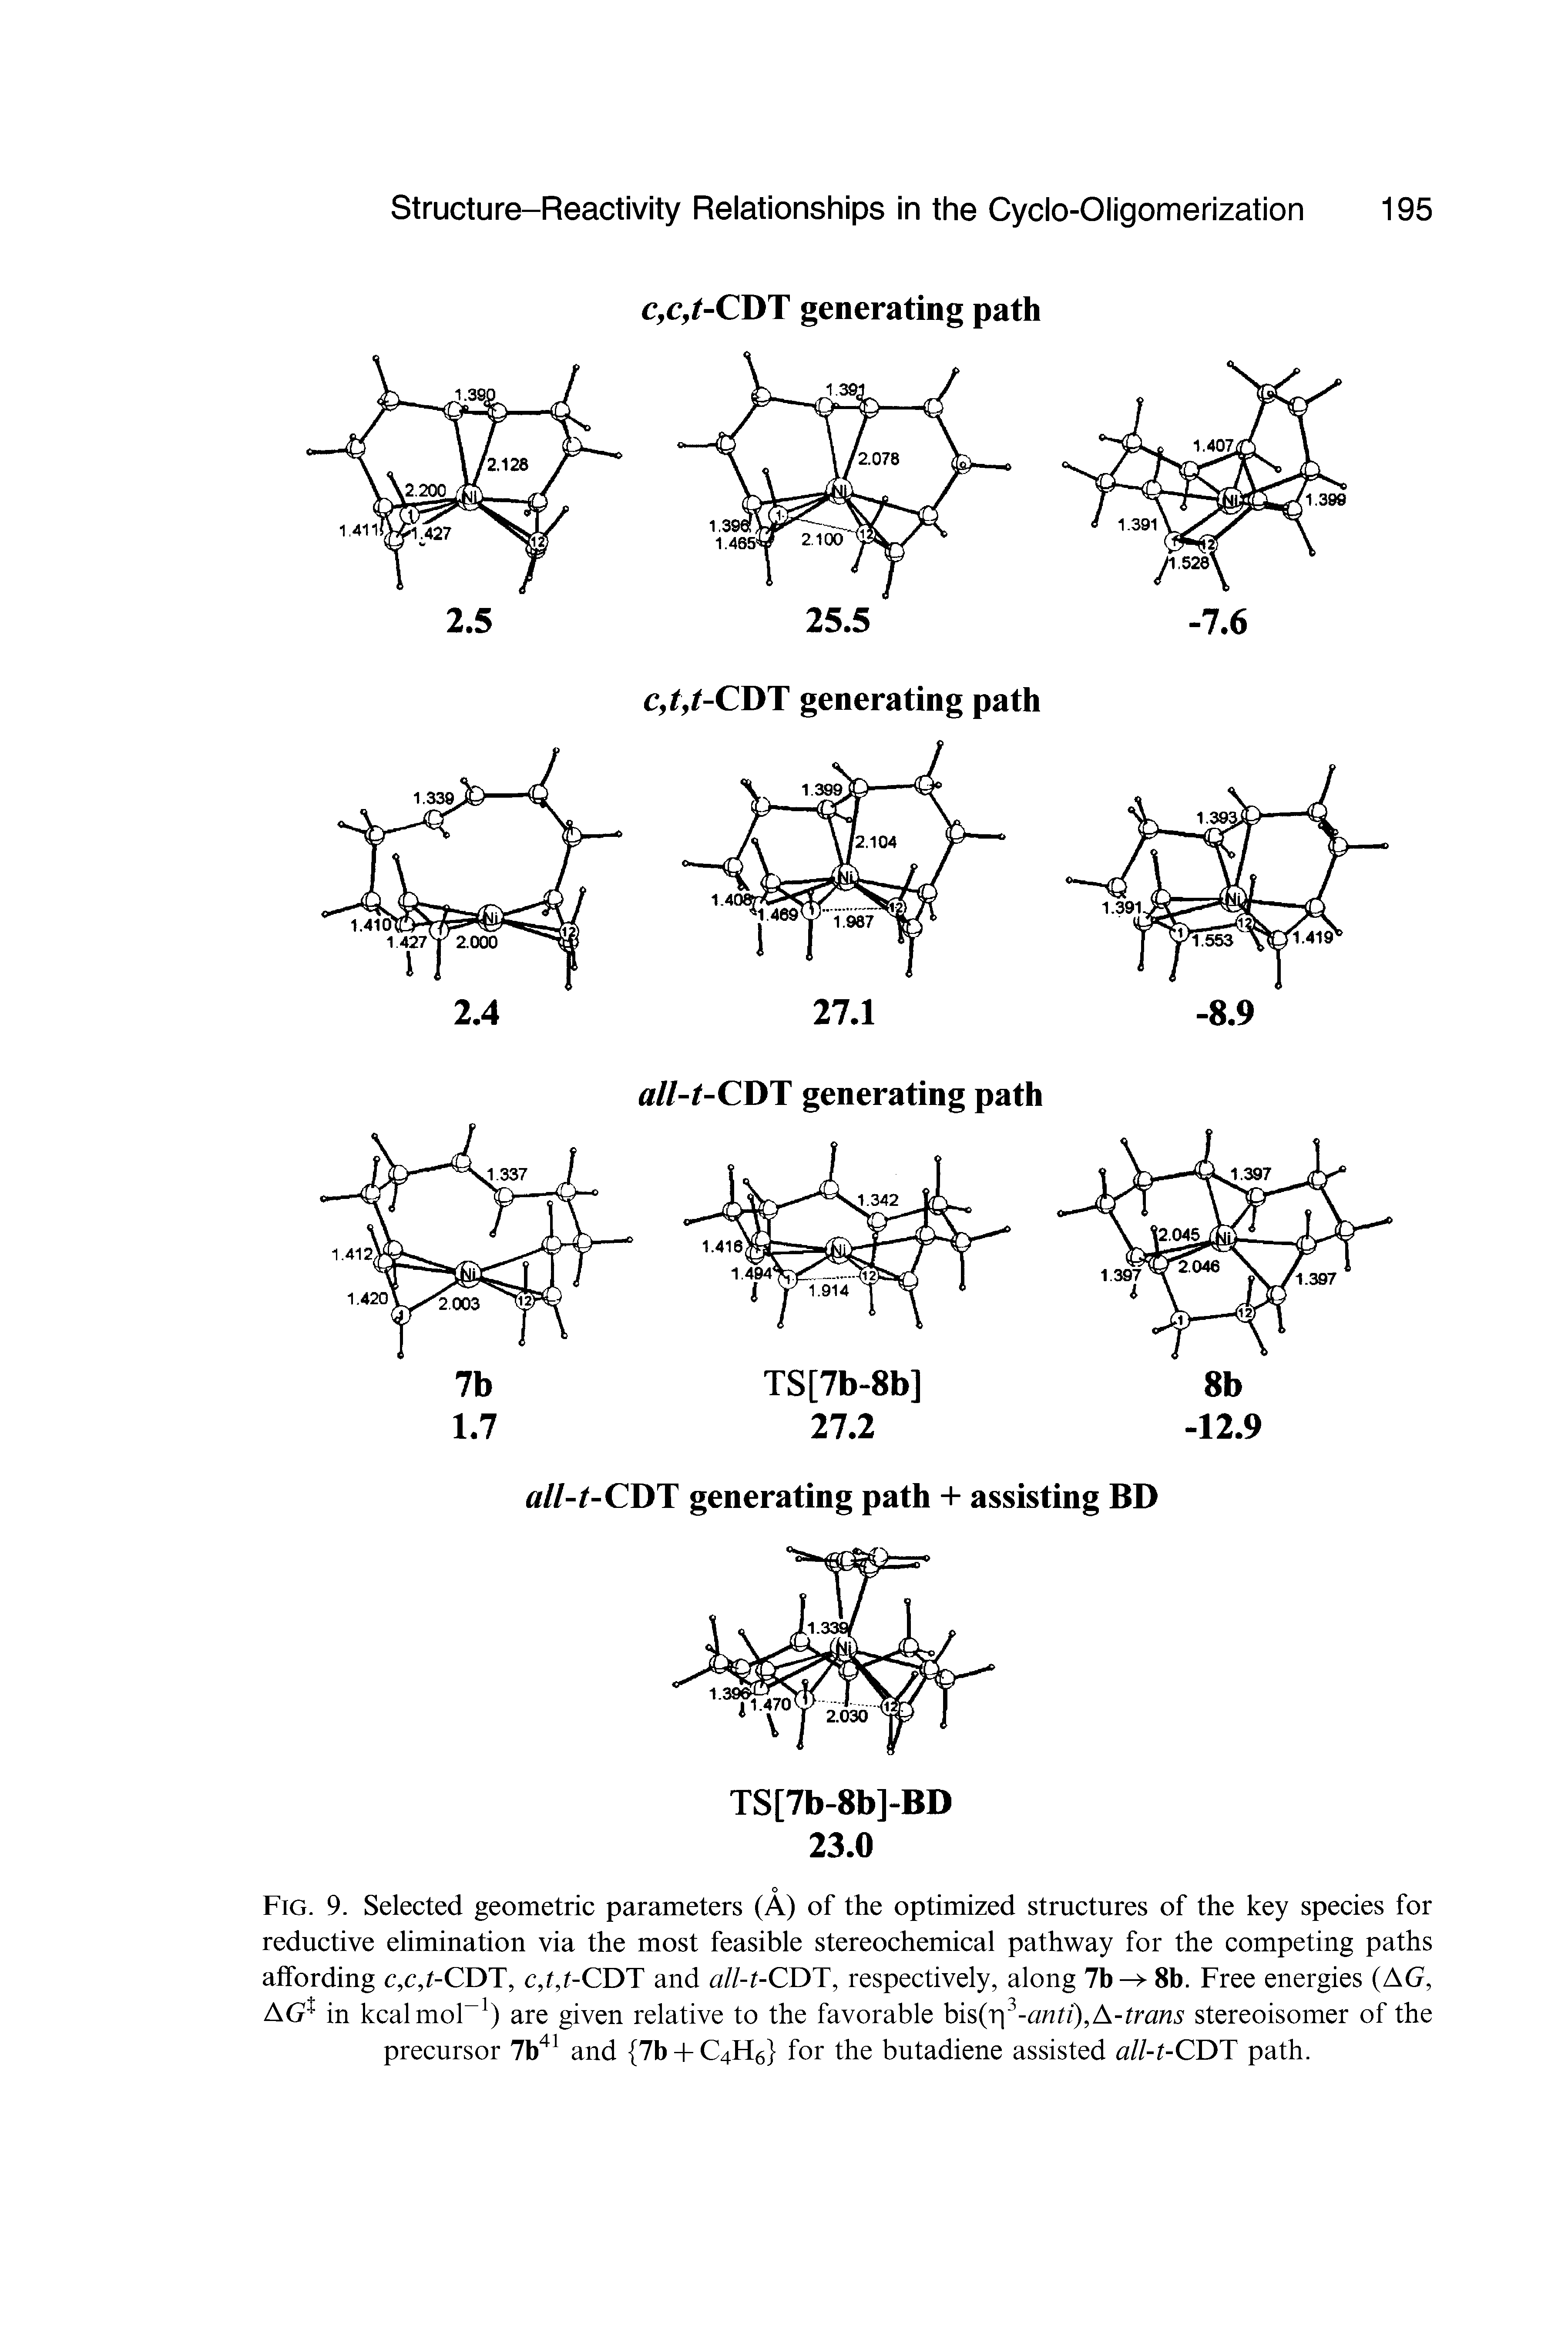 Fig. 9. Selected geometric parameters (A) of the optimized structures of the key species for reductive elimination via the most feasible stereochemical pathway for the competing paths affording c,c,I-CDT, c,t,t-CDT and all-t-CDT, respectively, along 7b 8b. Free energies (AG, AG in kcalmol-1) are given relative to the favorable bis(r 3-anti),A-trans stereoisomer of the precursor 7b41 and 7b + C4H6 for the butadiene assisted all-t-CDT path.